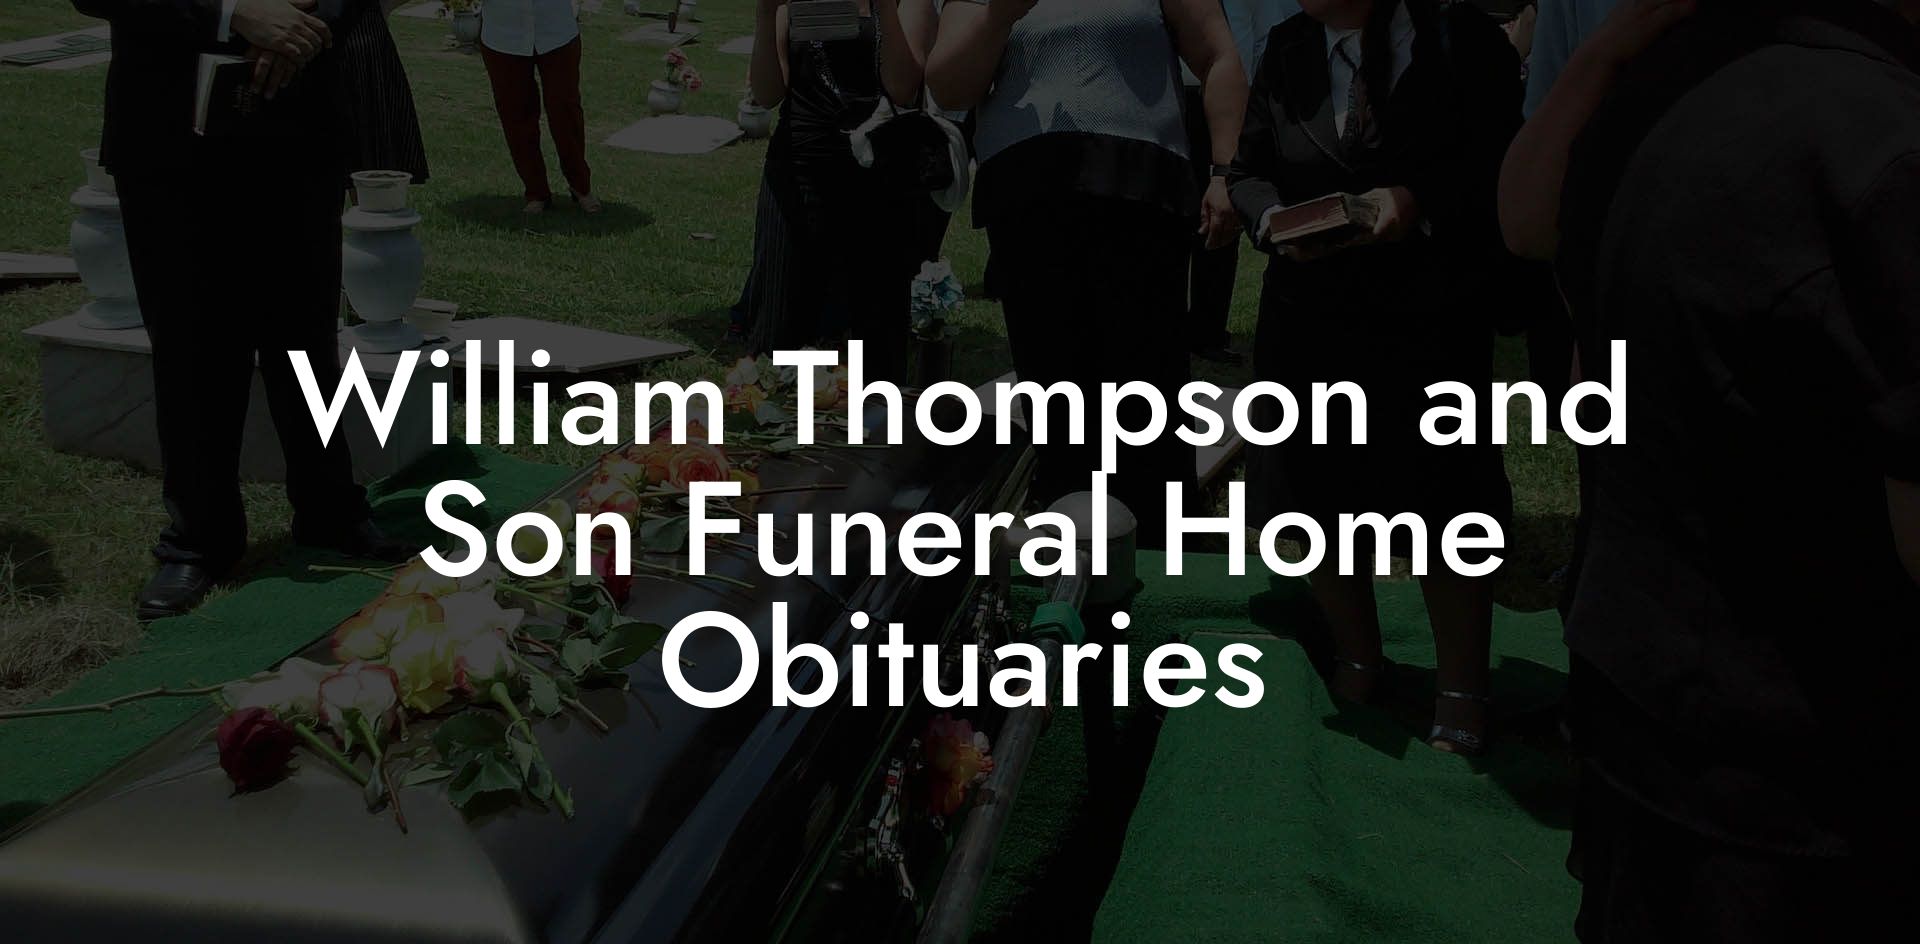 William Thompson and Son Funeral Home Obituaries